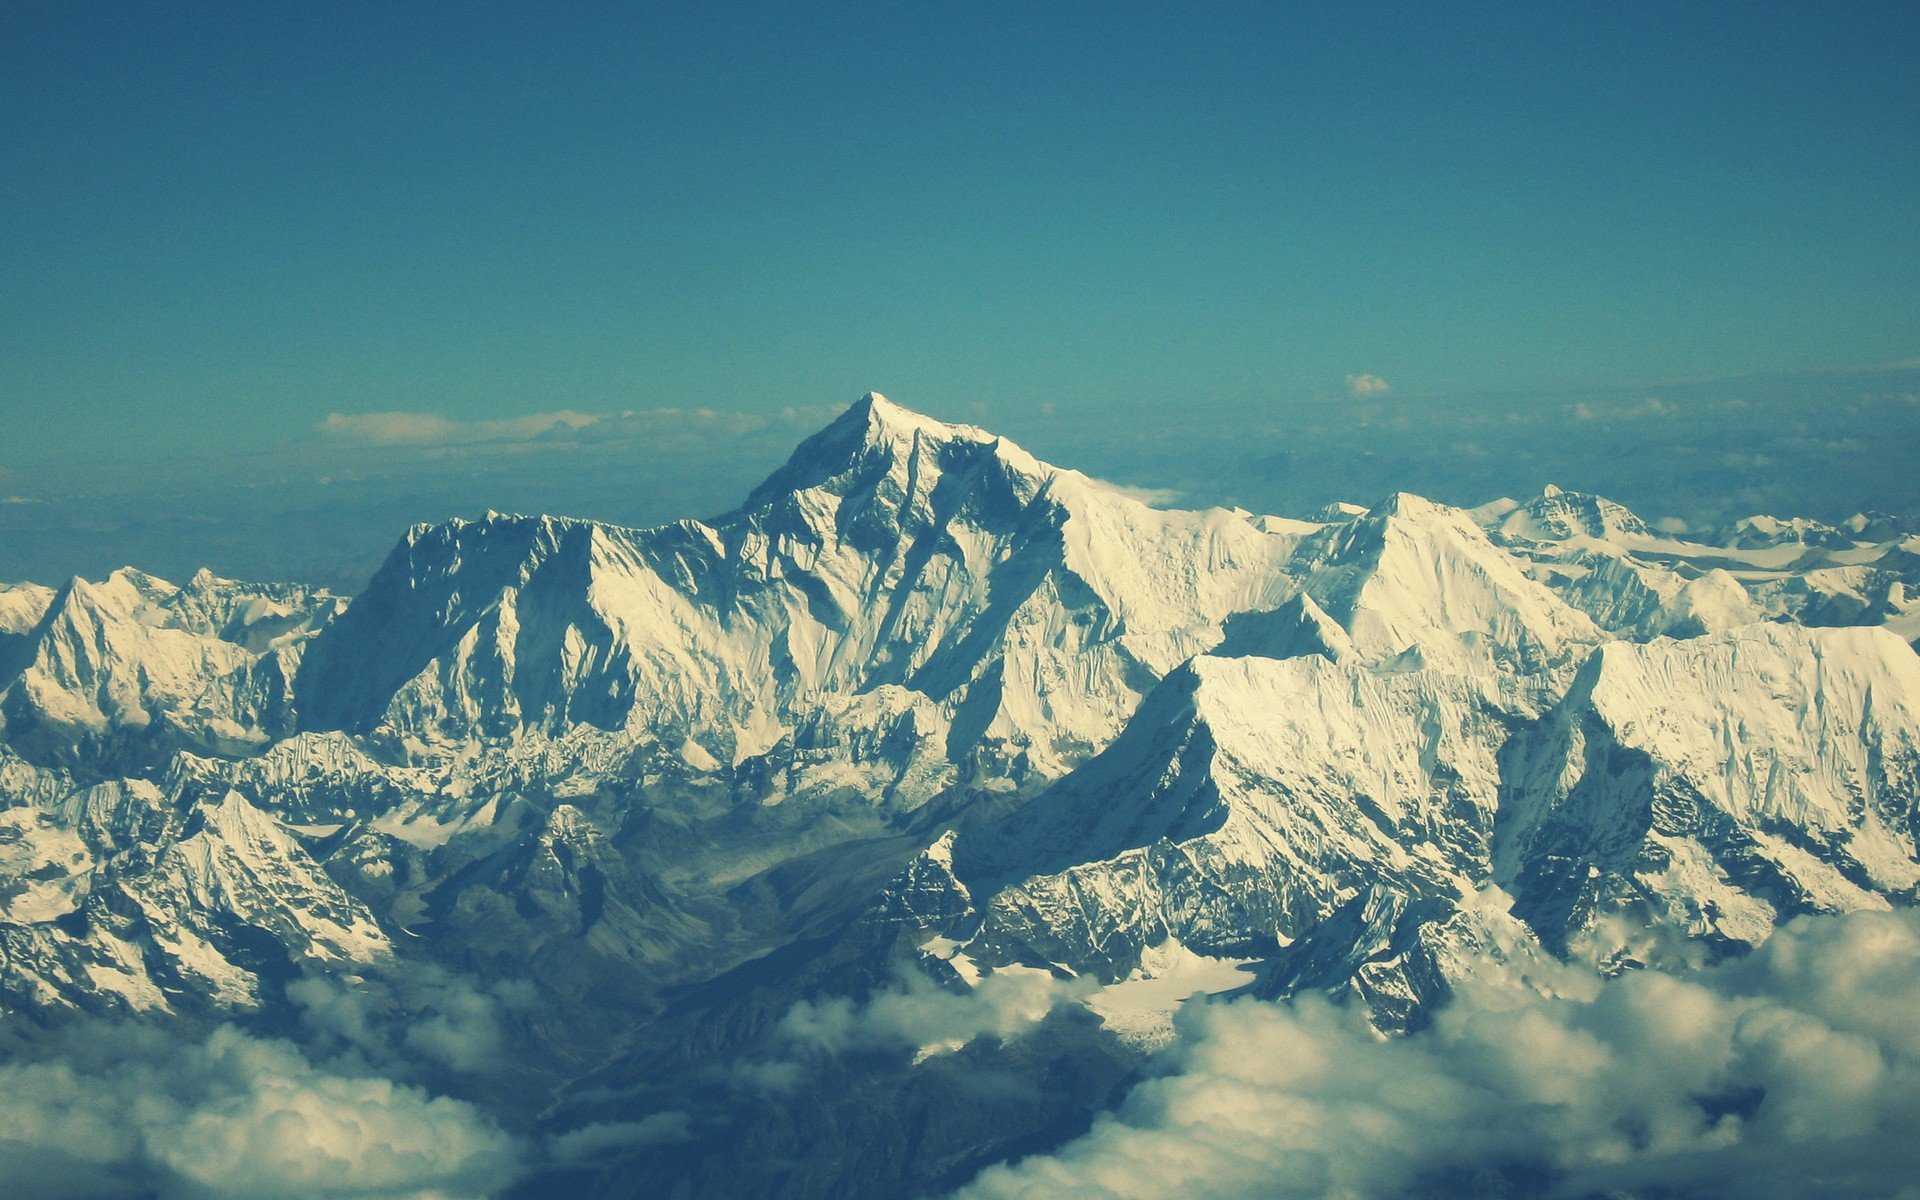 mountains, Clouds, Landscapes, Snow, Nepal, Teal, Skyscapes, Mount, Everest, Geography Wallpaper